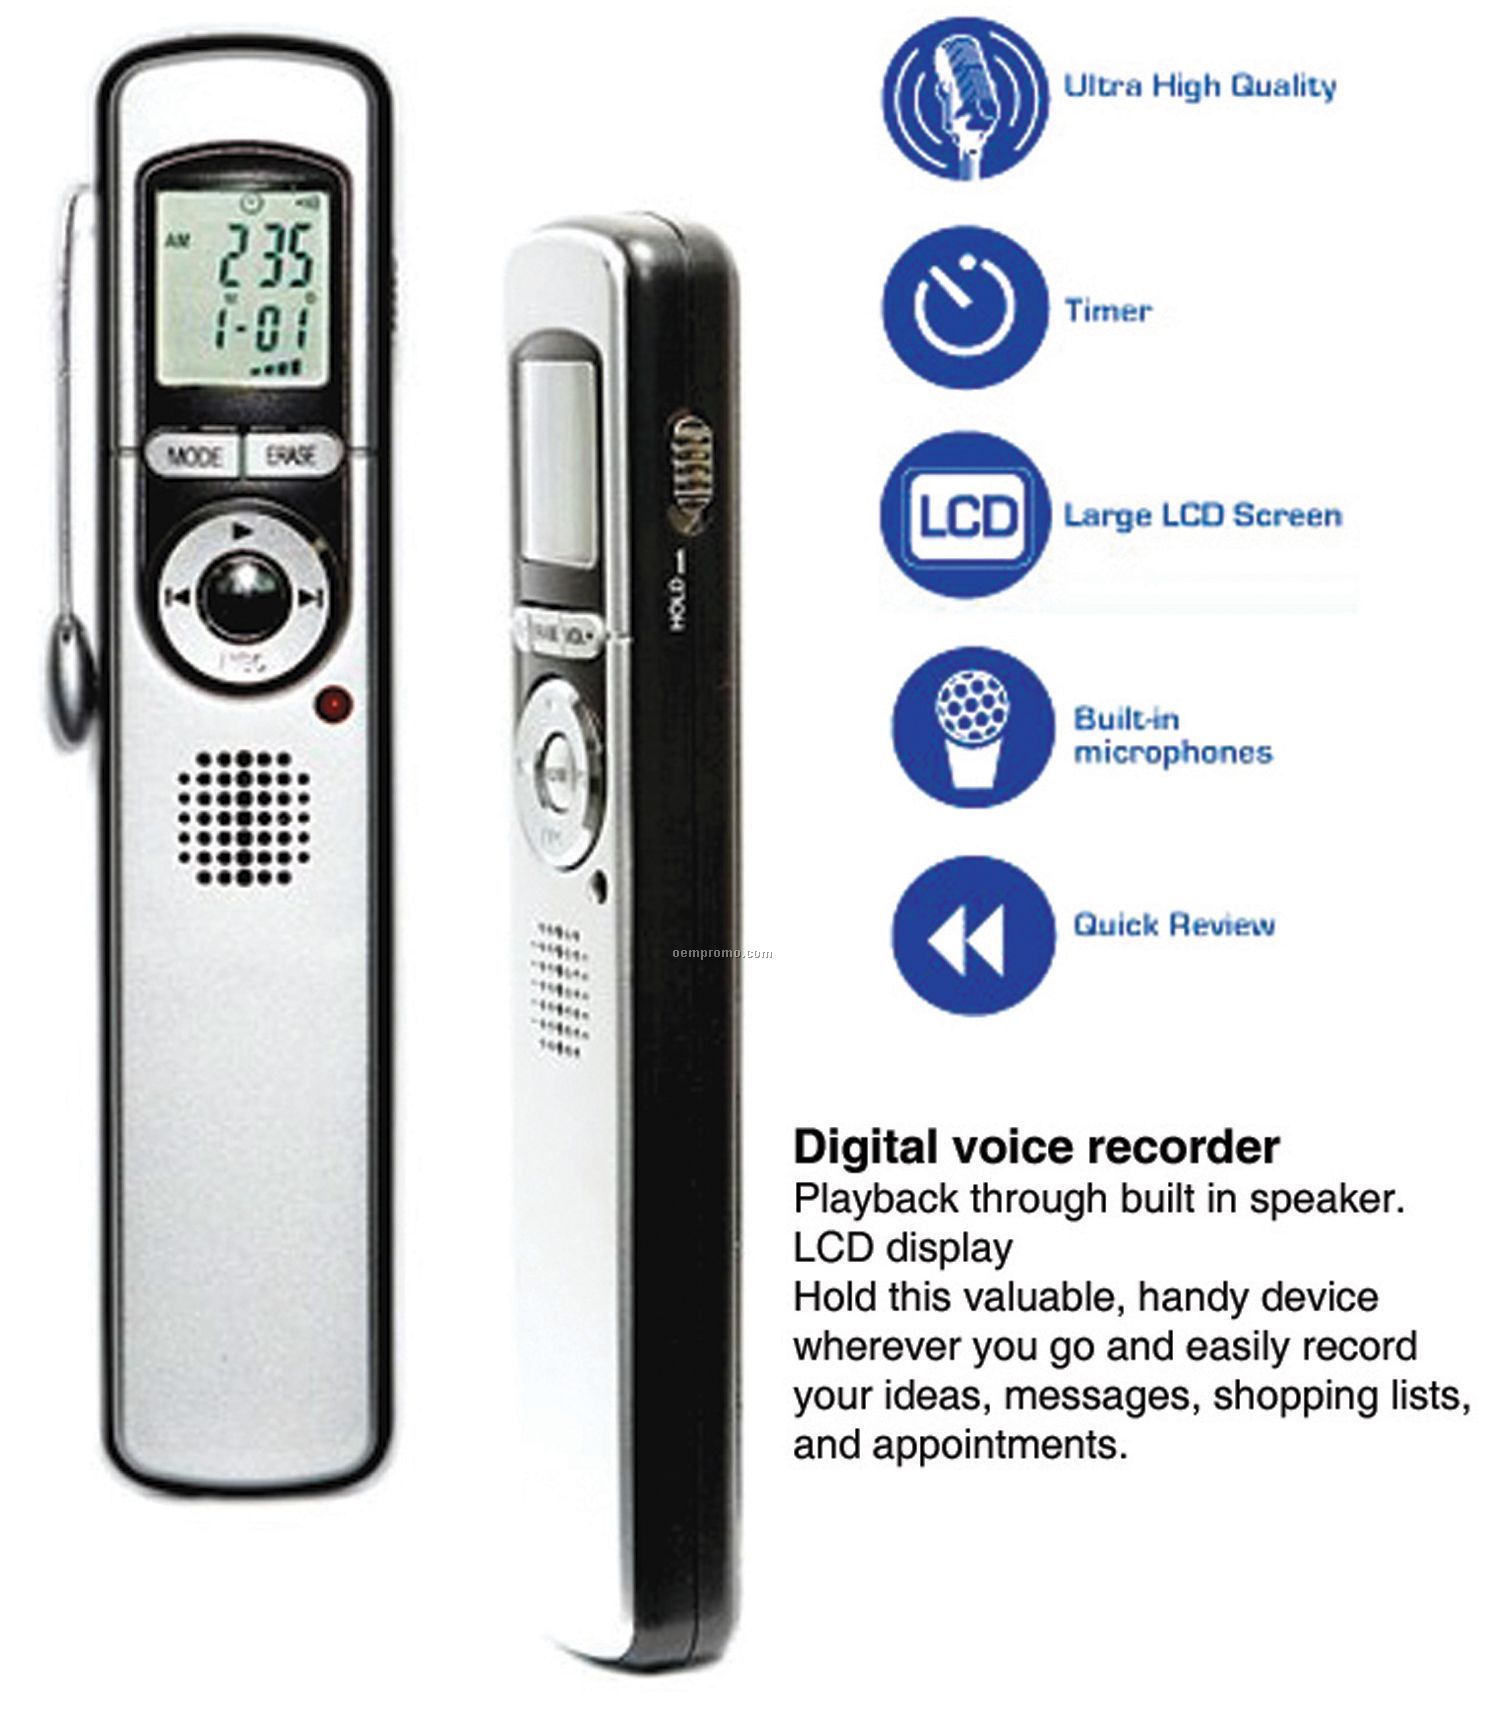 Digital Voice Recorder - 11 Minutes Recording Time